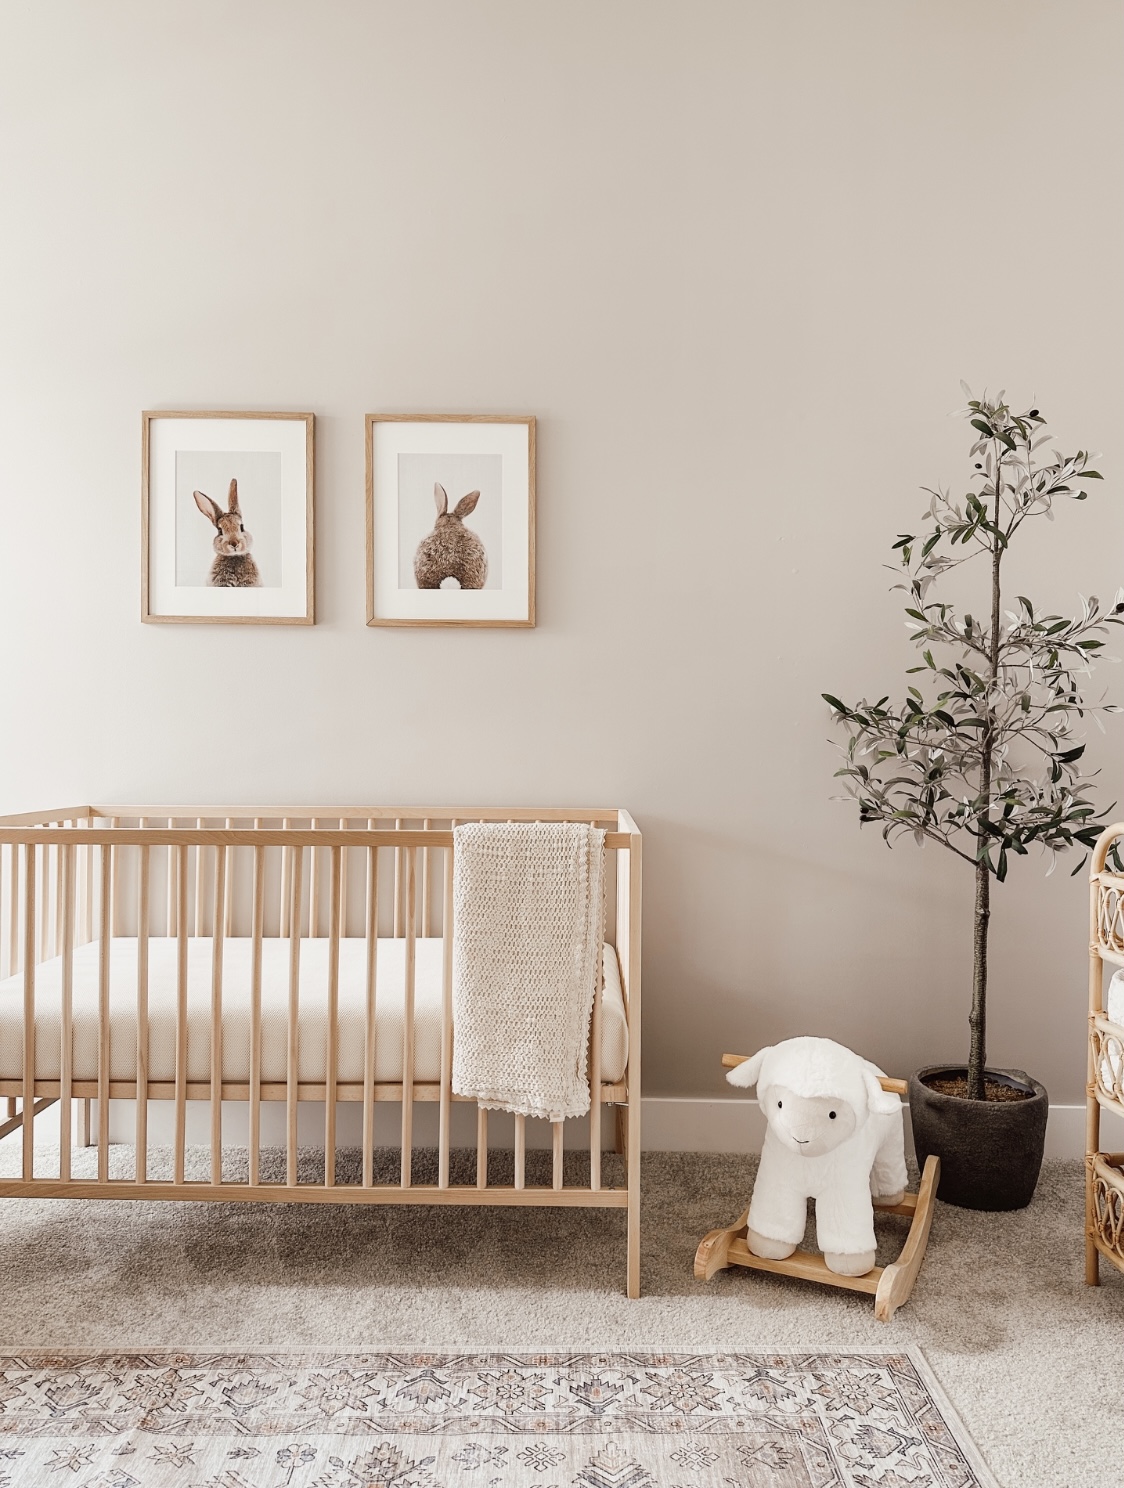 This nursery includes gender neutral walls, bunny artwork, a modern wooden crib, and a sheep rocker.